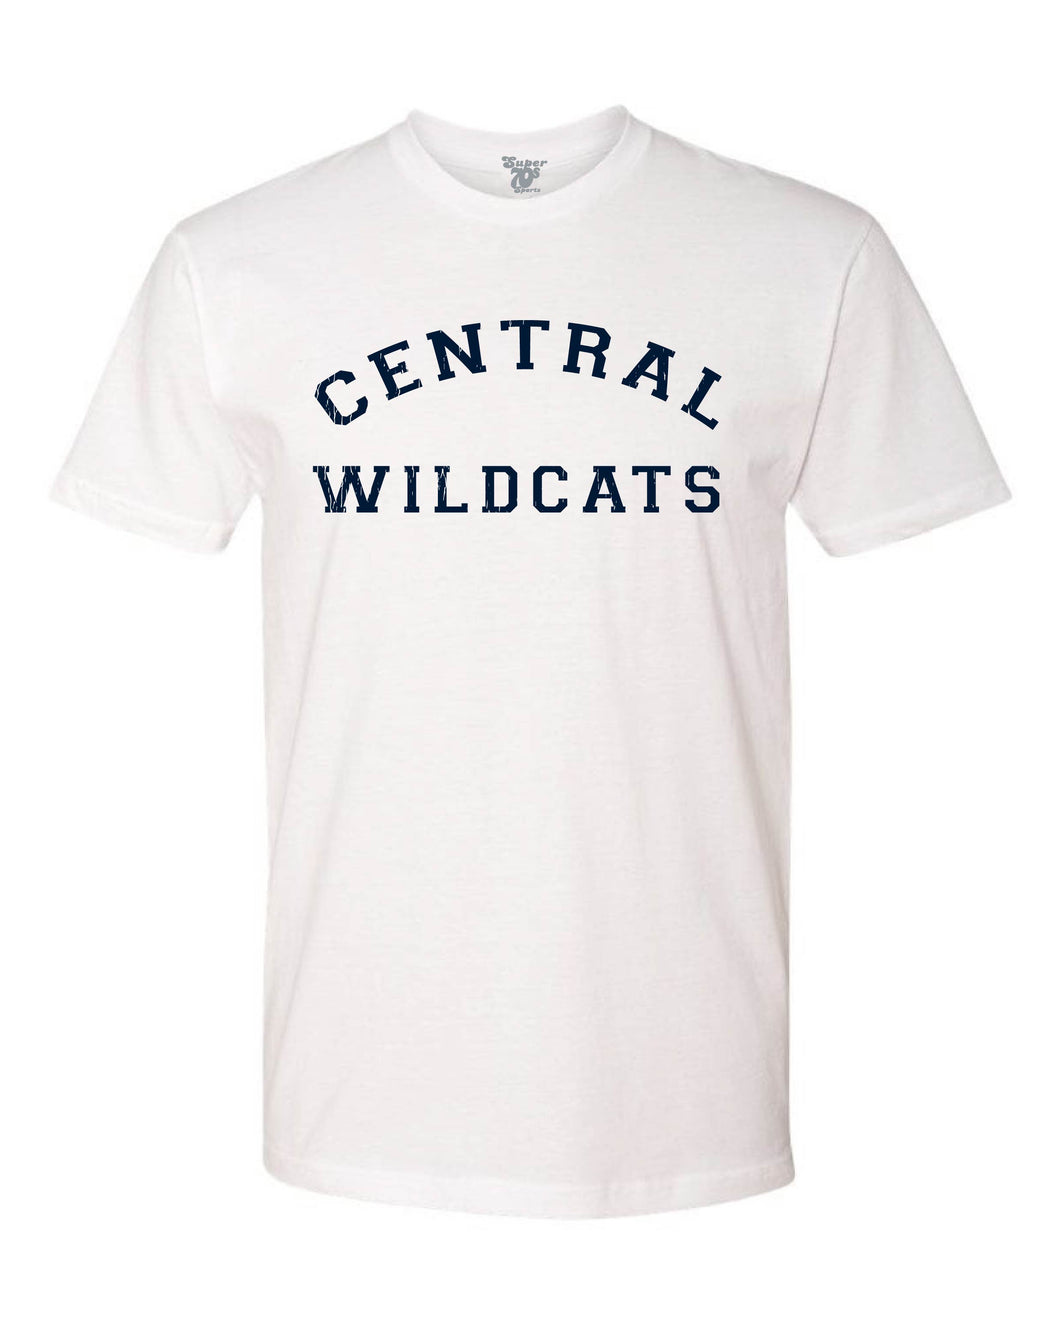 Central Wildcats Tee